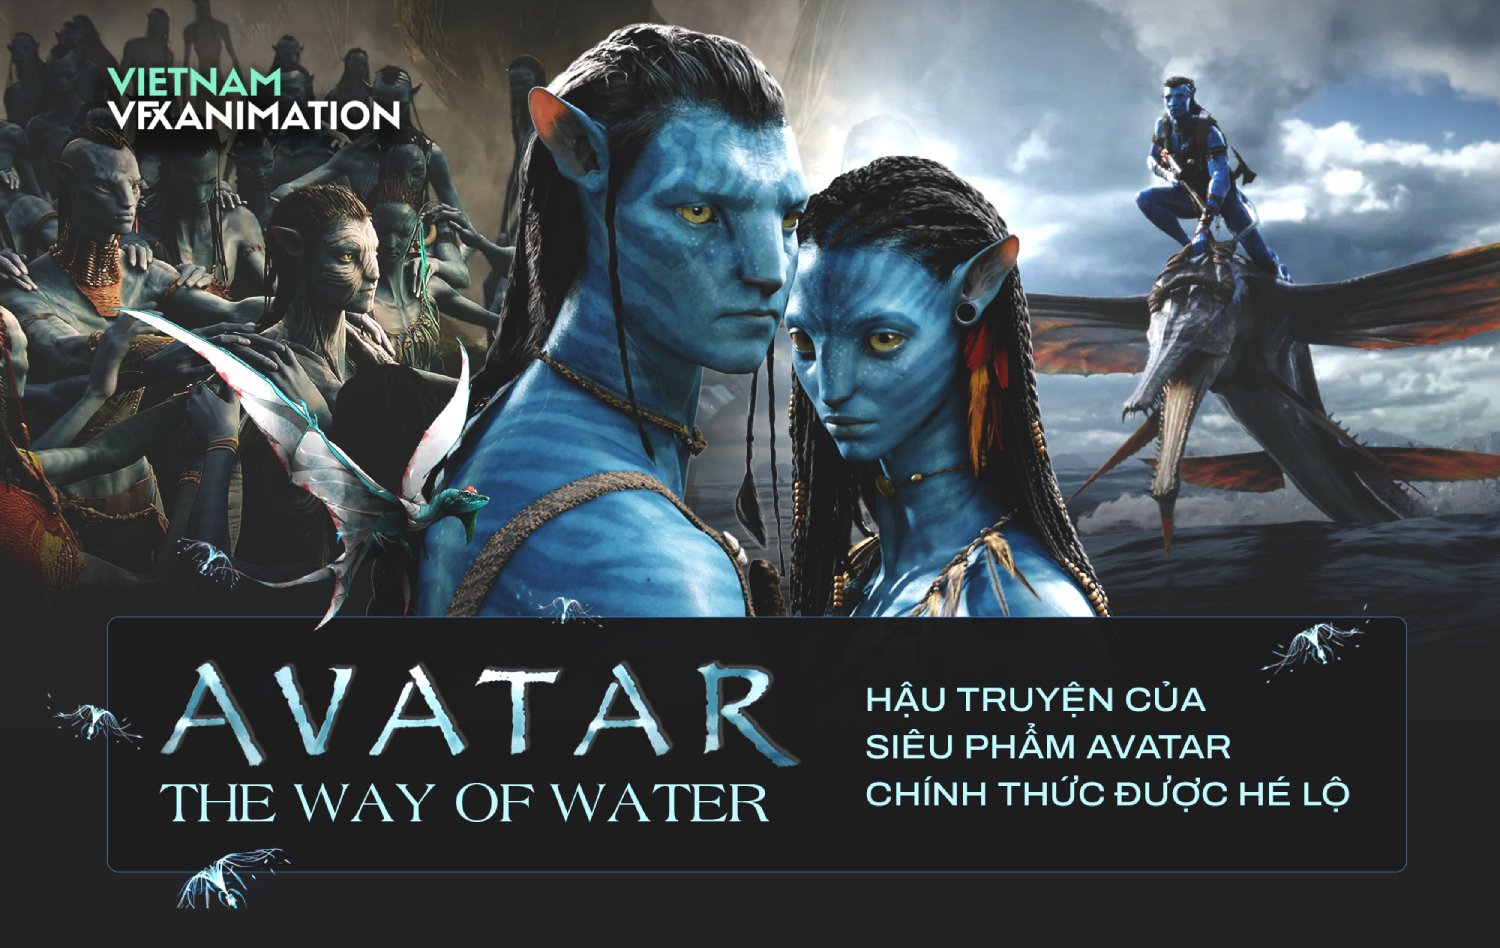 Avatar 2 Full HD Available For Free Download Online On Tamilrockers And  Other Torrent Sites